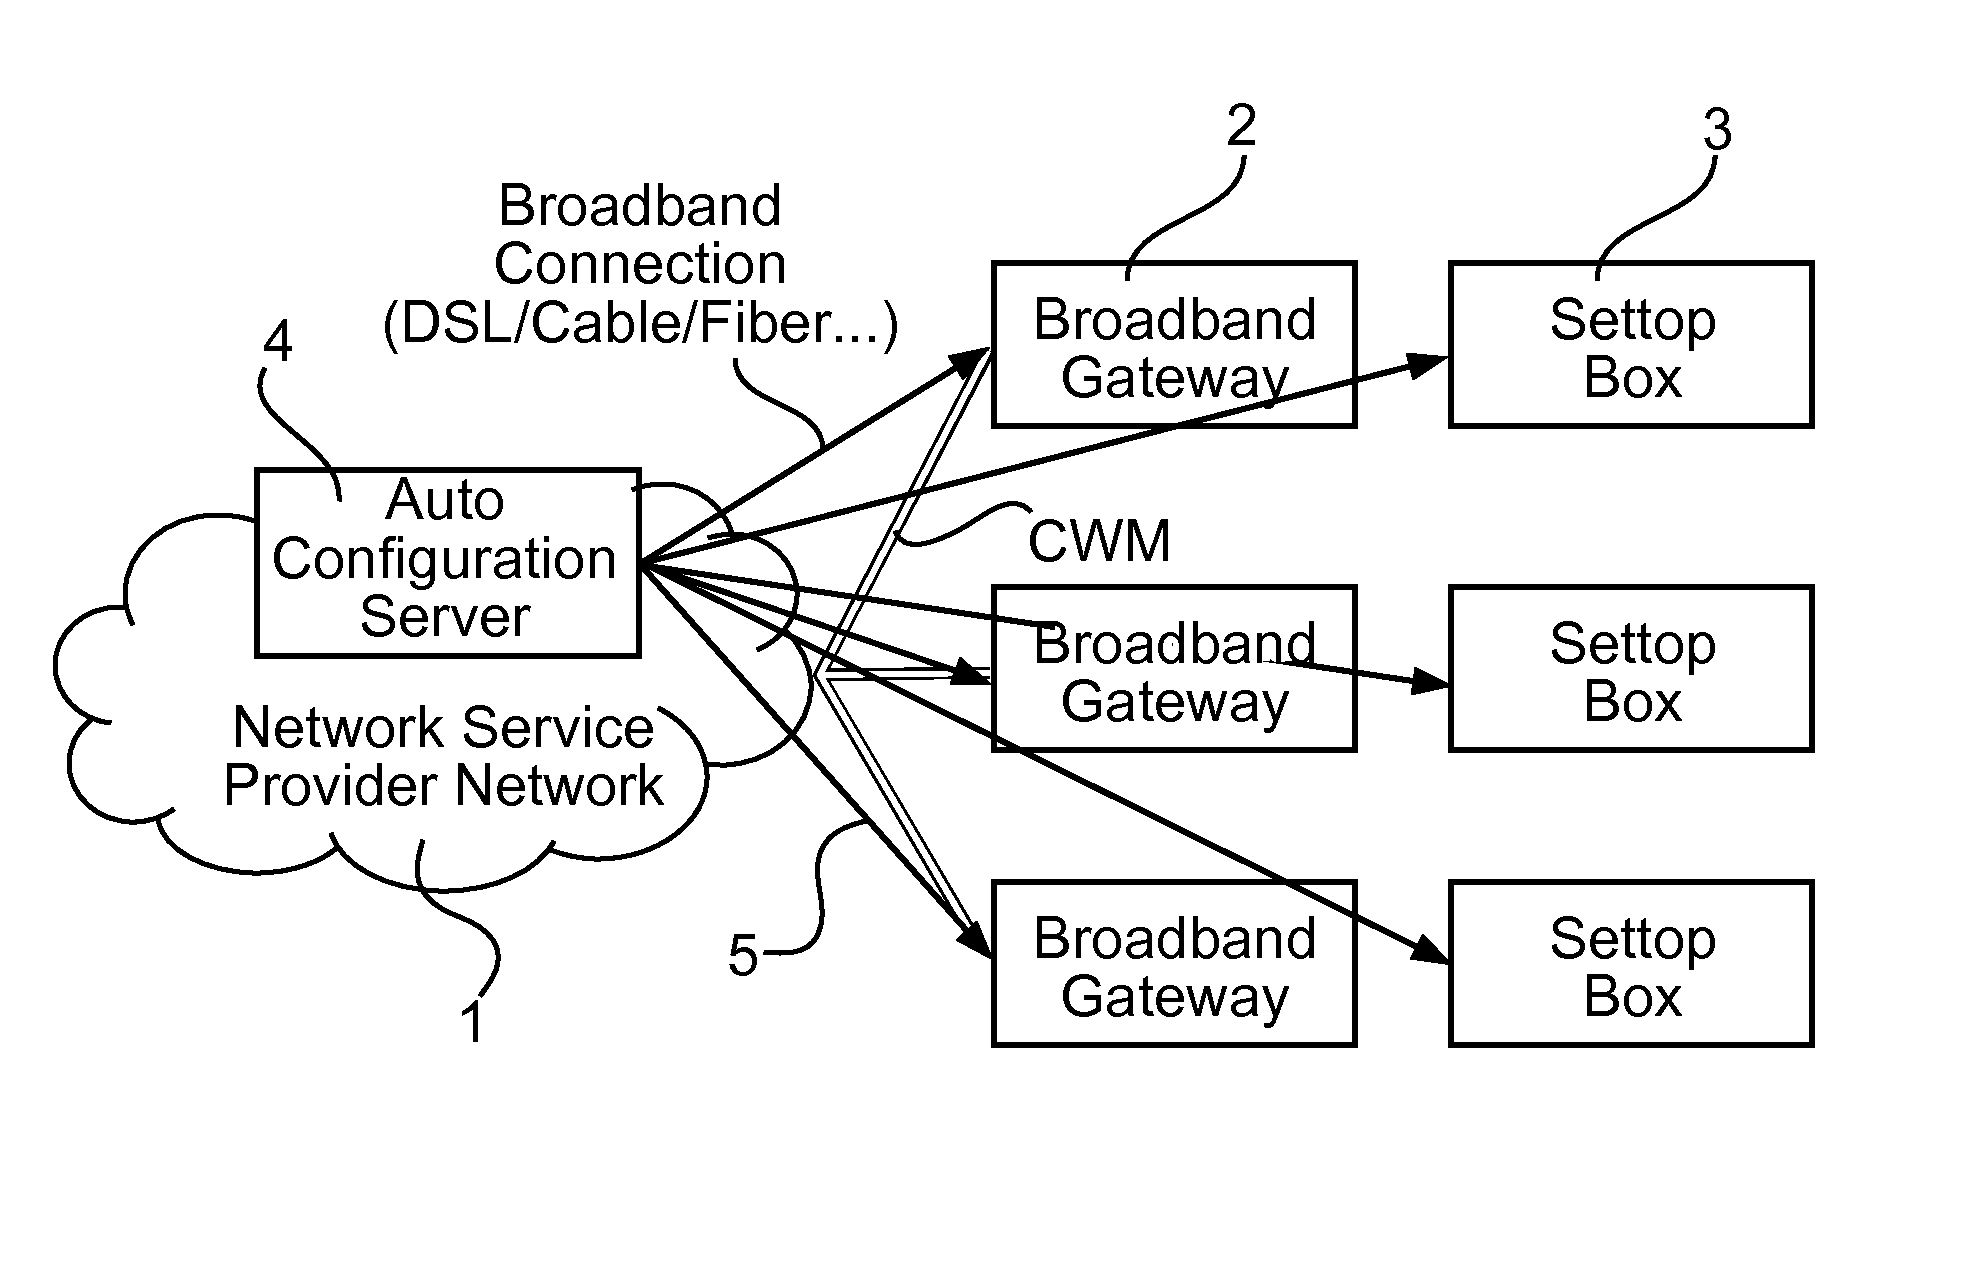 System comprising a publish/subscribe broker for a remote management of end-user devices, and respective end-user device